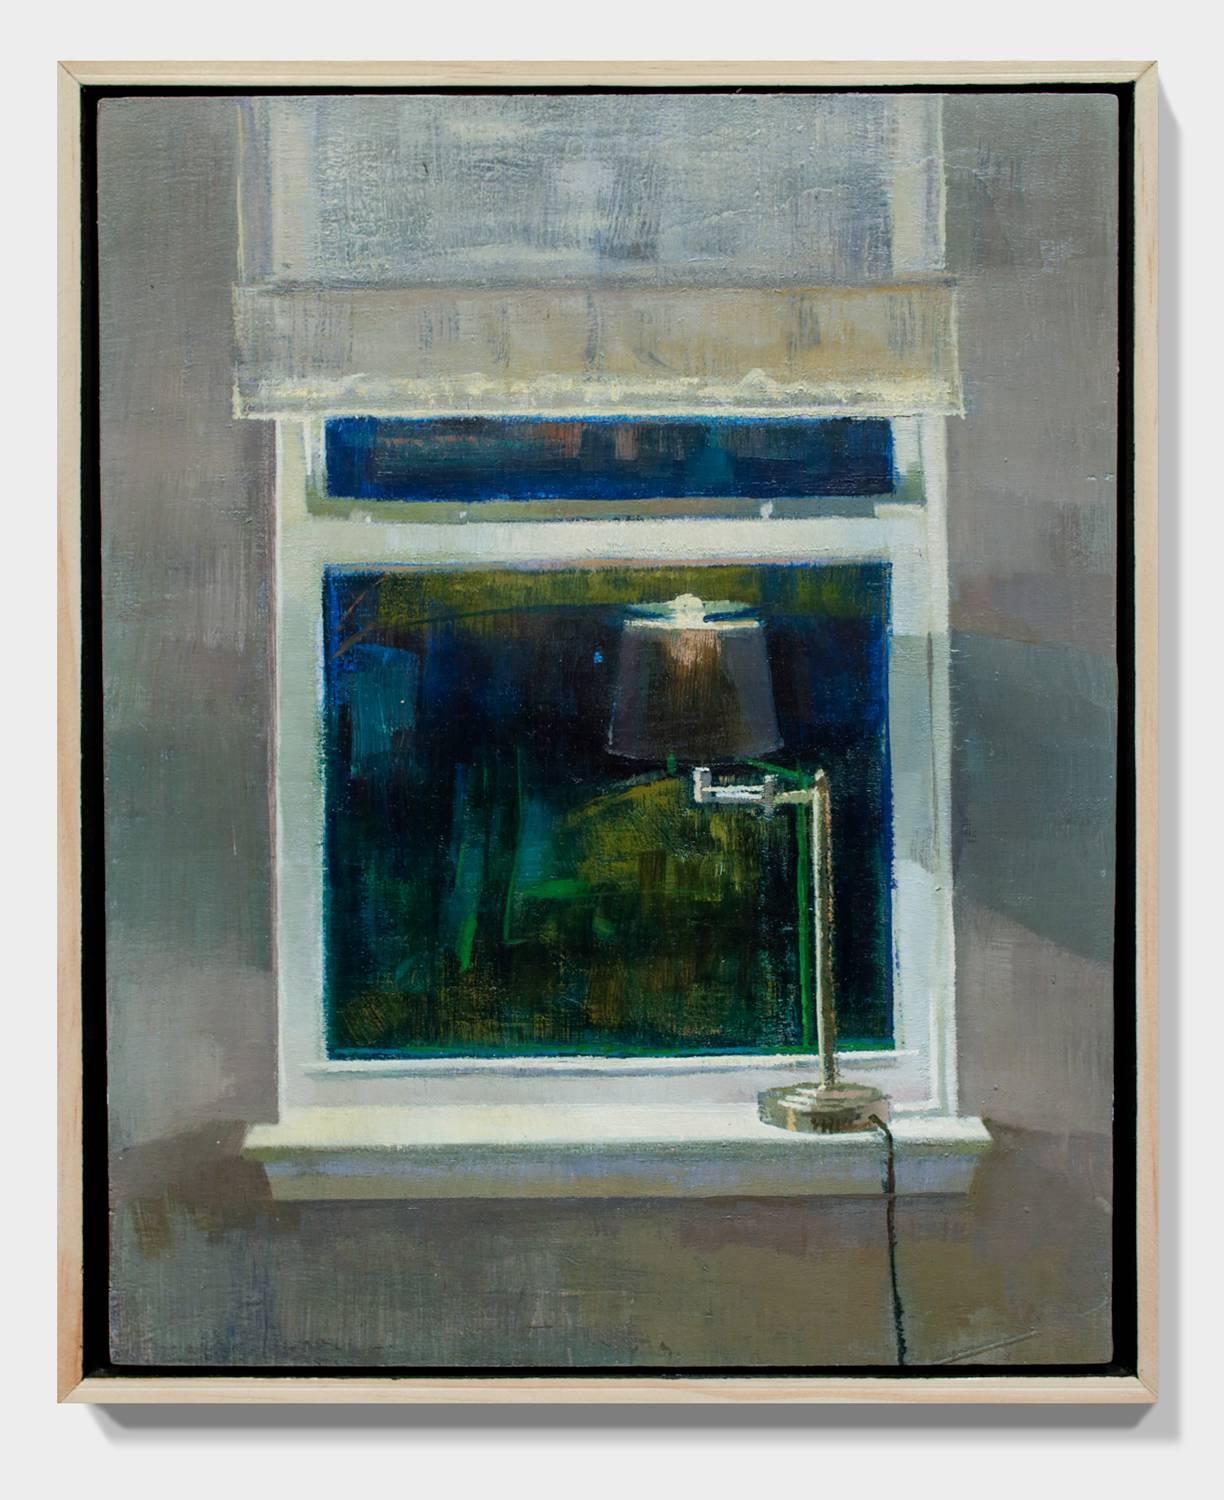 "Nightworks" is an original oil painting by Sara Pedigo.  This piece measures 10.5in x 8.75in in the pictured wooden box frame.

STATEMENT // There is no life without light. I am enthralled and preoccupied by light’s incredible power to